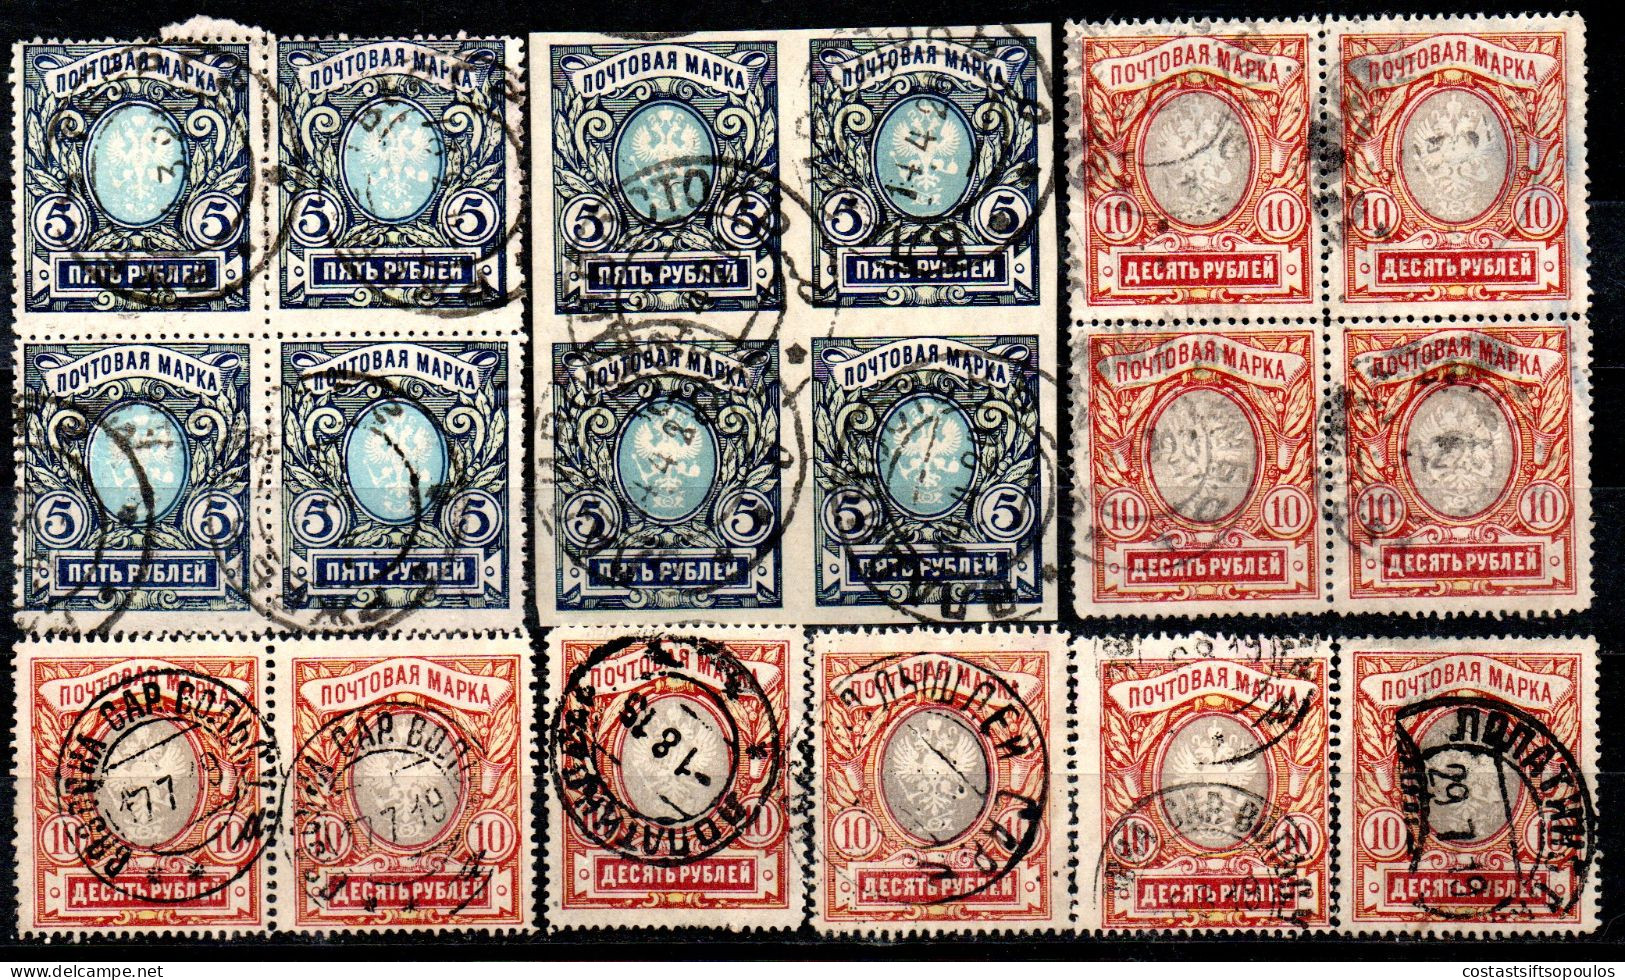 2673. RUSSIA 1915-1917 5 & 10 R.LOT. GOOD CONDITION. - Used Stamps